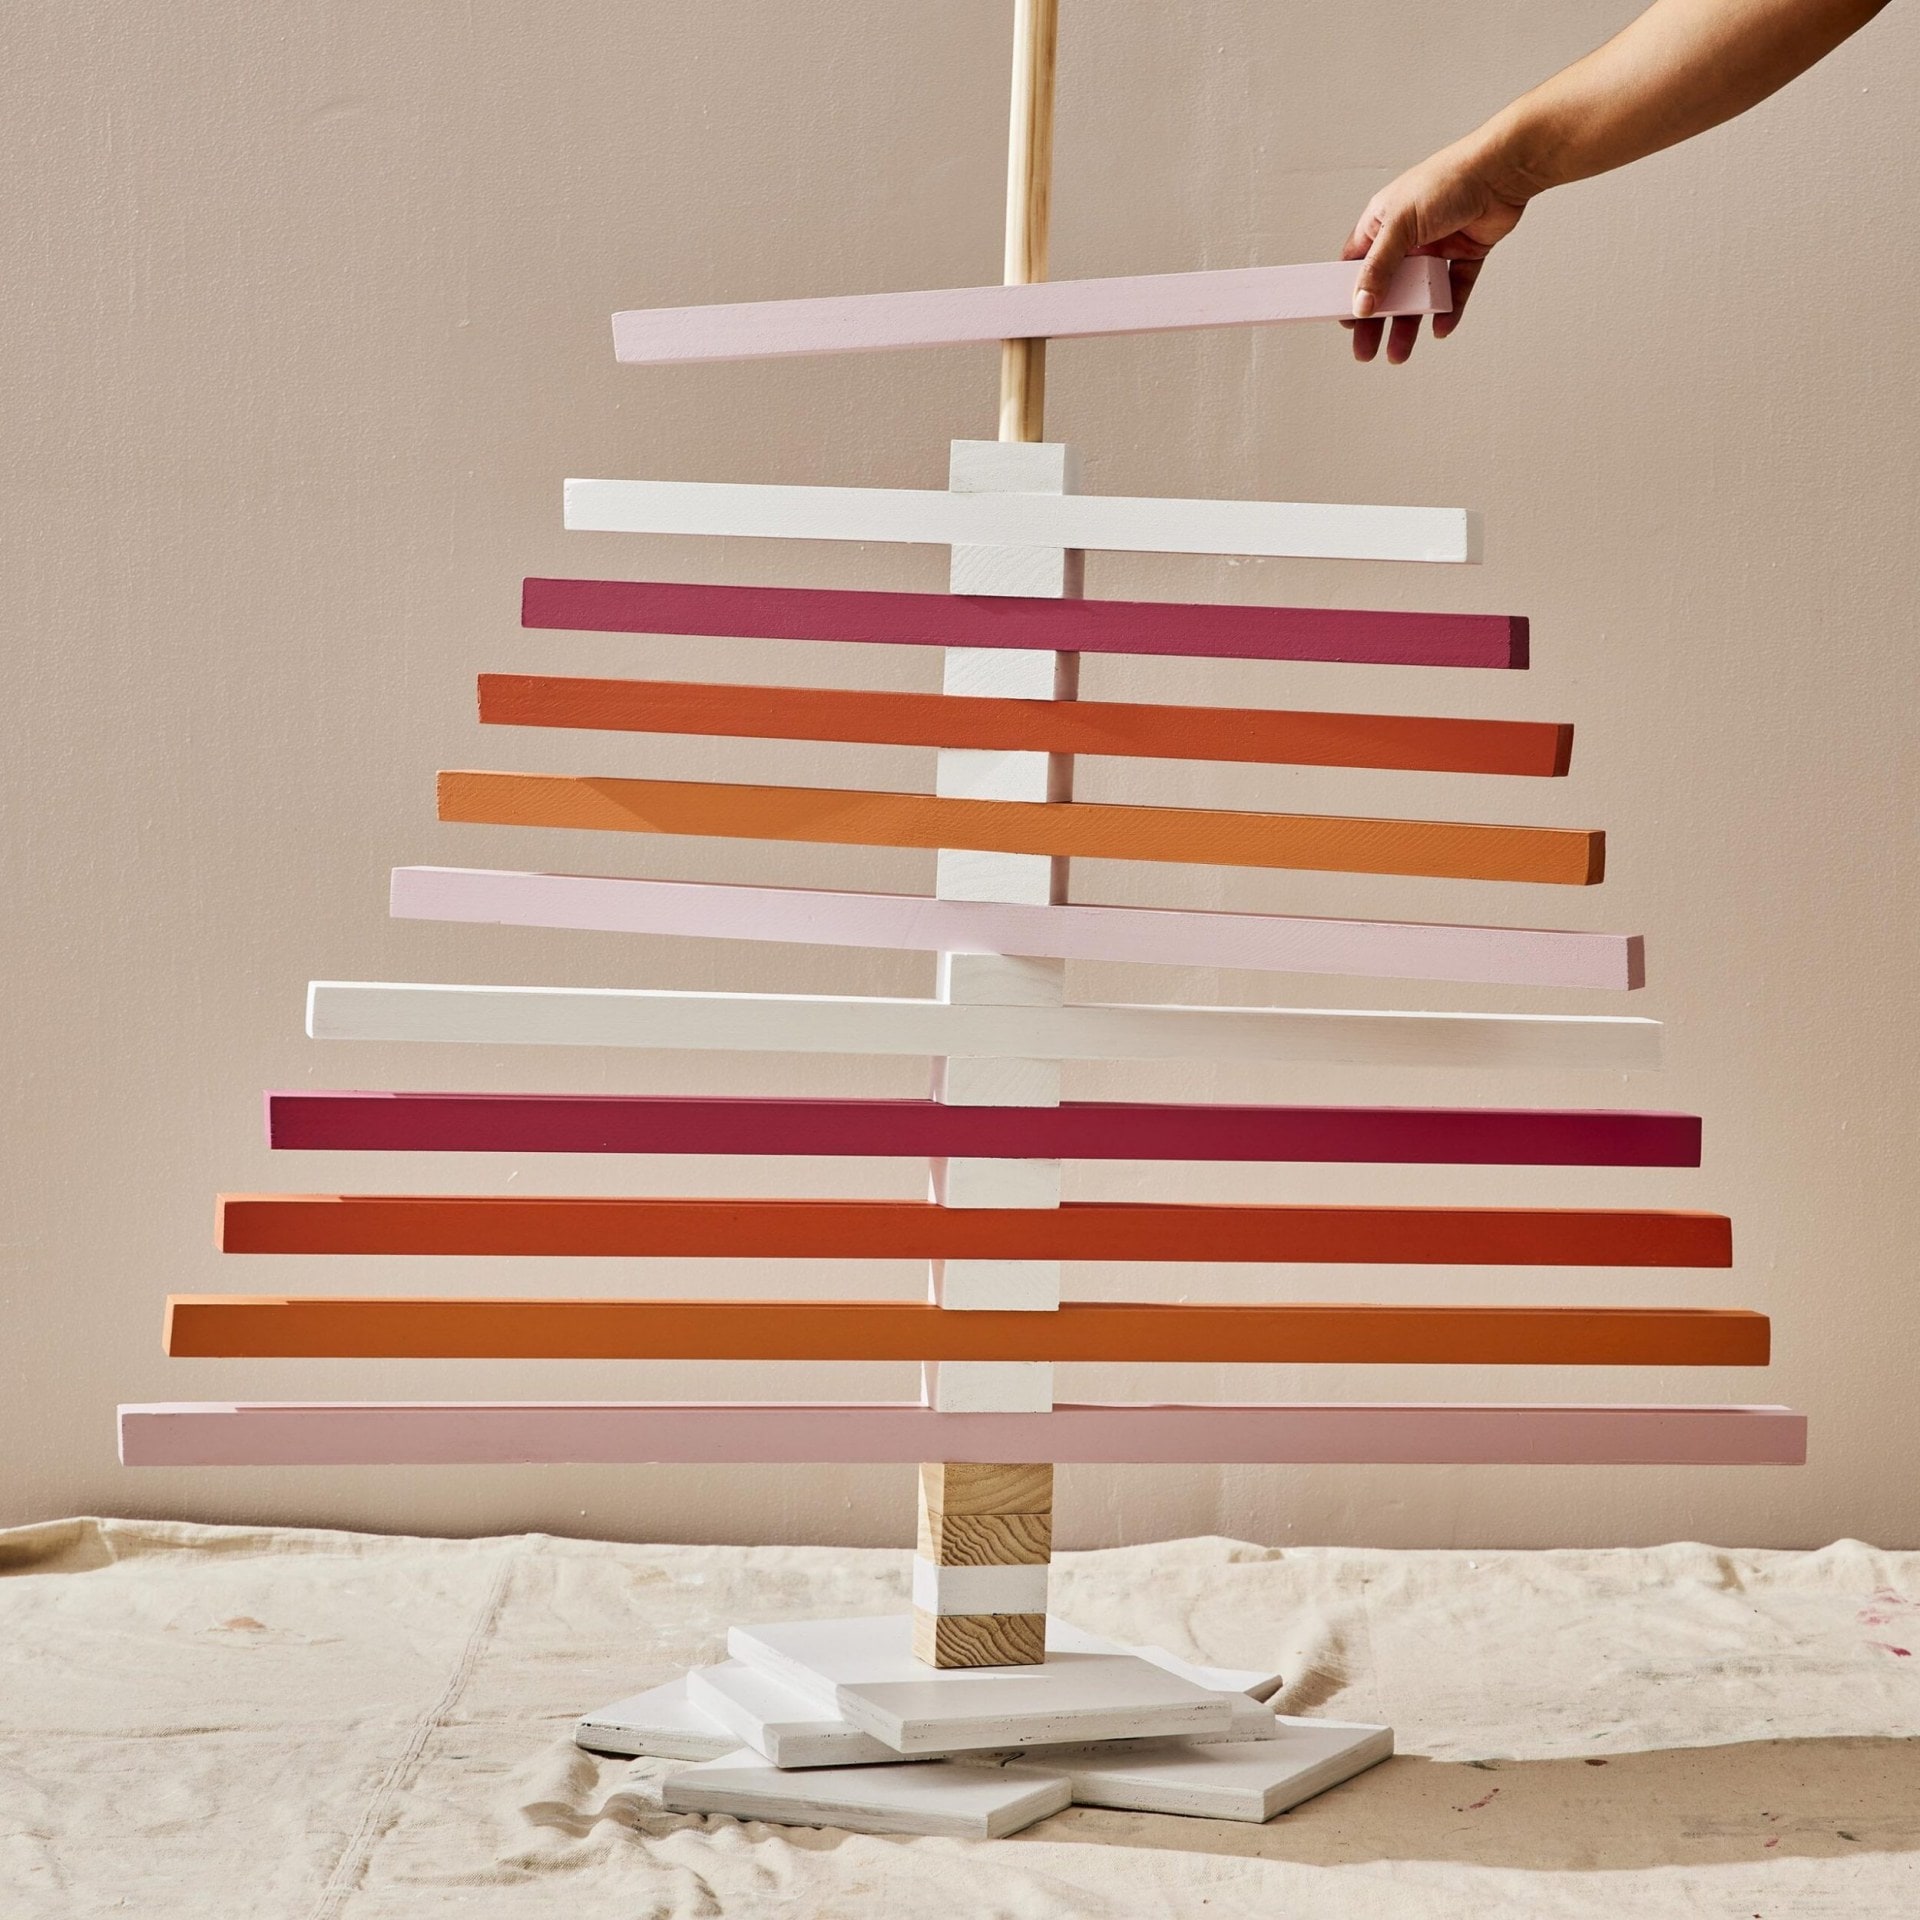 wooden planks attached to a base to create a christmas tree